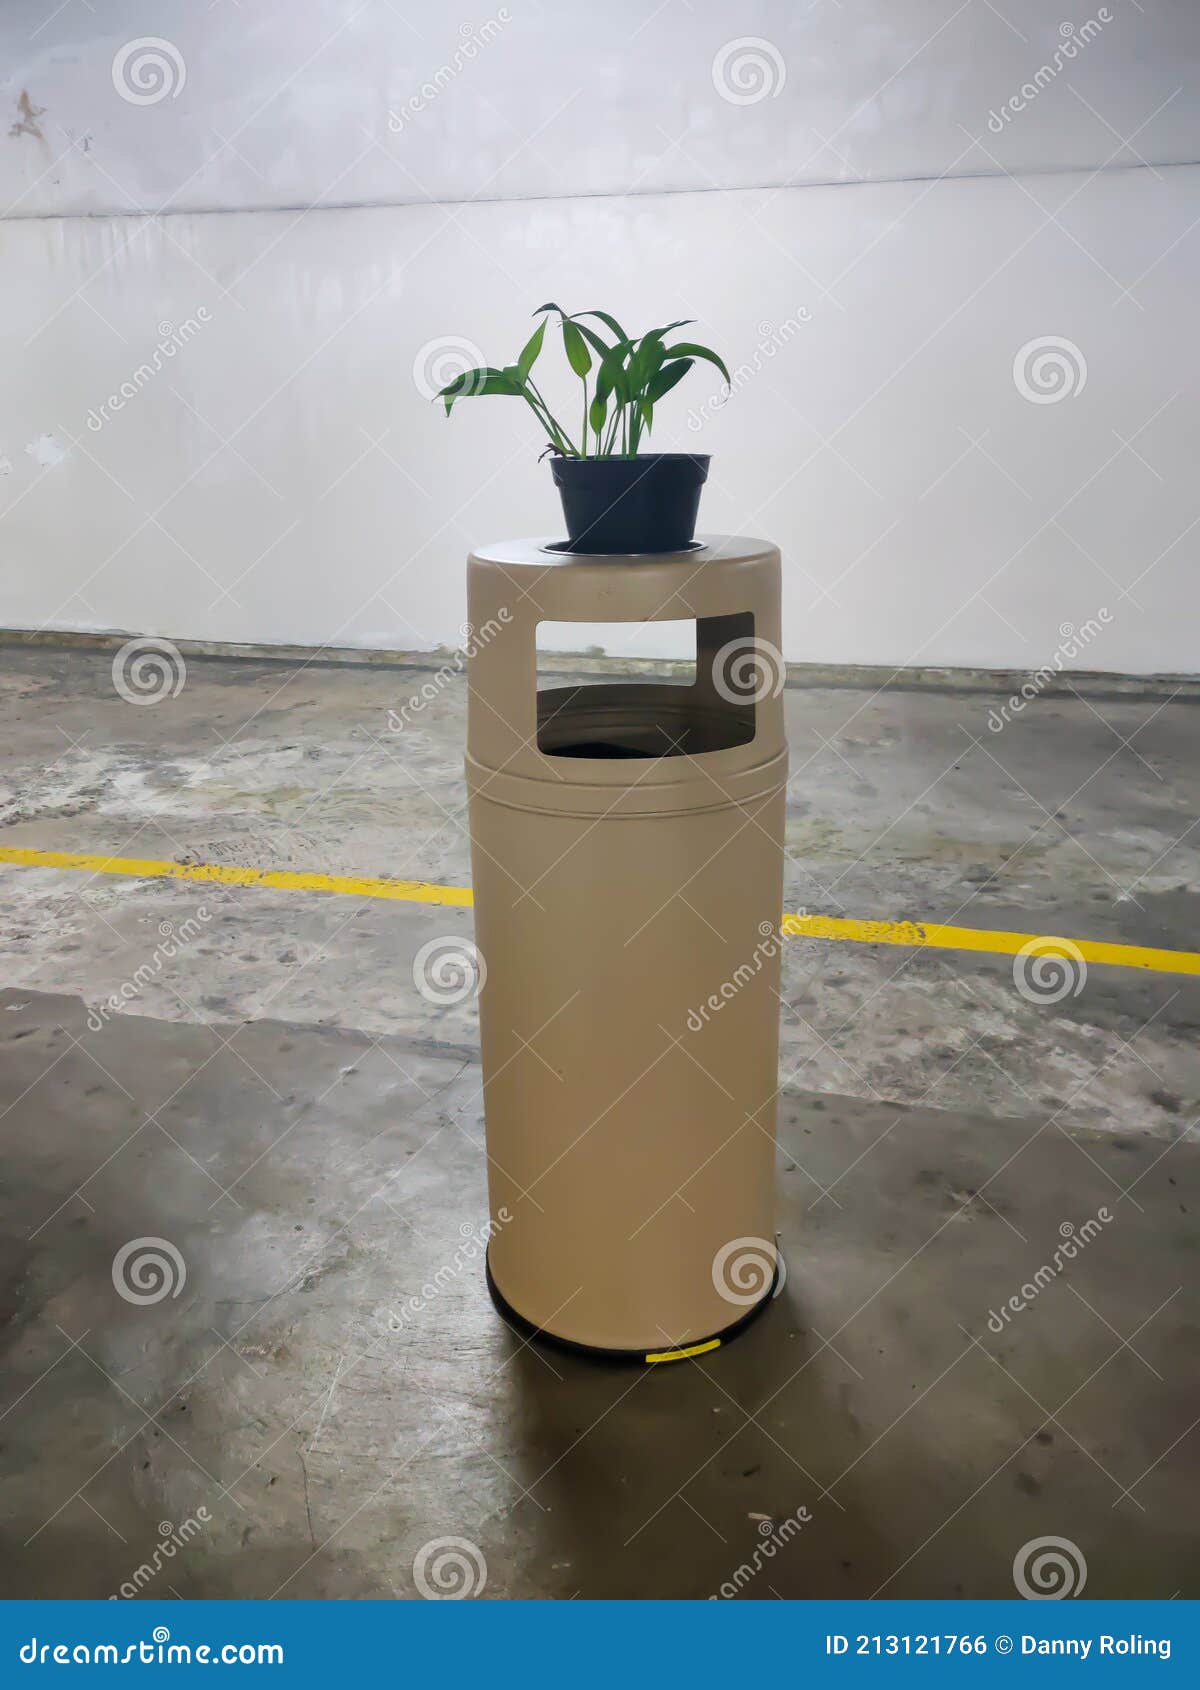 plant on the pot in the trashbin